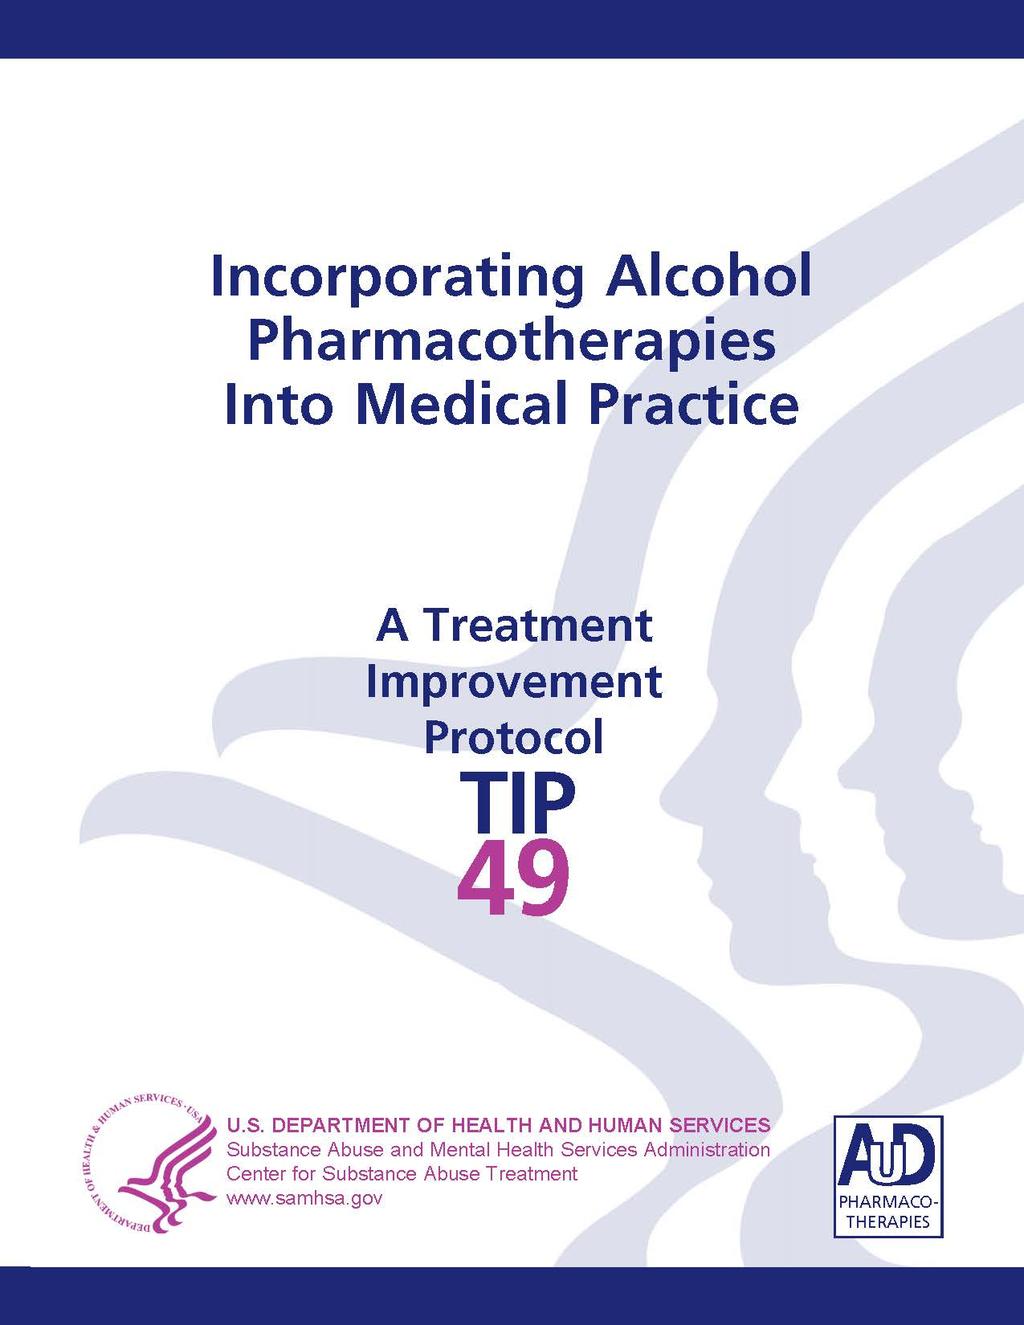 U.S. Department of Health and Human Services. Treatment Improvement Protocol (TIP) 49: incorporating alcohol pharmacotherapies into medical practice, HHS Publication No SMA13-4380.